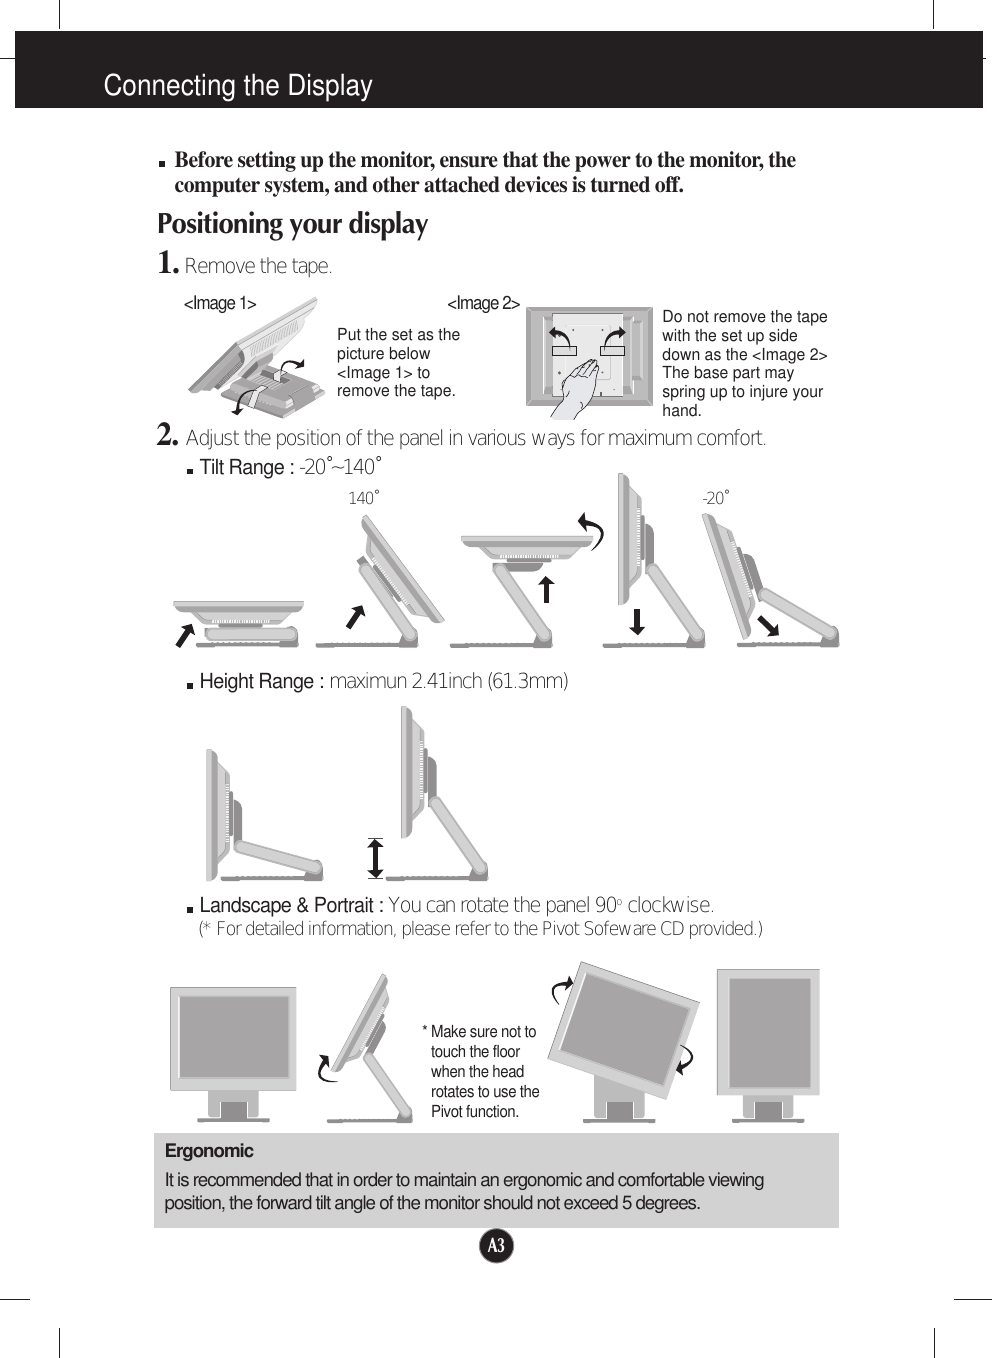 A3Connecting the DisplayBefore setting up the monitor, ensure that the power to the monitor, thecomputer system, and other attached devices is turned off. Positioning your display1.Remove the tape.ErgonomicIt is recommended that in order to maintain an ergonomic and comfortable viewingposition, the forward tilt angle of the monitor should not exceed 5 degrees.Height Range : maximun 2.41inch (61.3mm)Landscape &amp; Portrait : You can rotate the panel 90o  clockwise. (* For detailed information, please refer to the Pivot Sofeware CD provided.)2. Adjust the position of the panel in various ways for maximum comfort.Tilt Range : -20˚~140˚140˚ -20˚* Make sure not totouch the floorwhen the headrotates to use thePivot function.&lt;Image 1&gt;Put the set as thepicture below&lt;Image 1&gt; toremove the tape. Do not remove the tapewith the set up sidedown as the &lt;Image 2&gt;The base part mayspring up to injure yourhand. &lt;Image 2&gt;